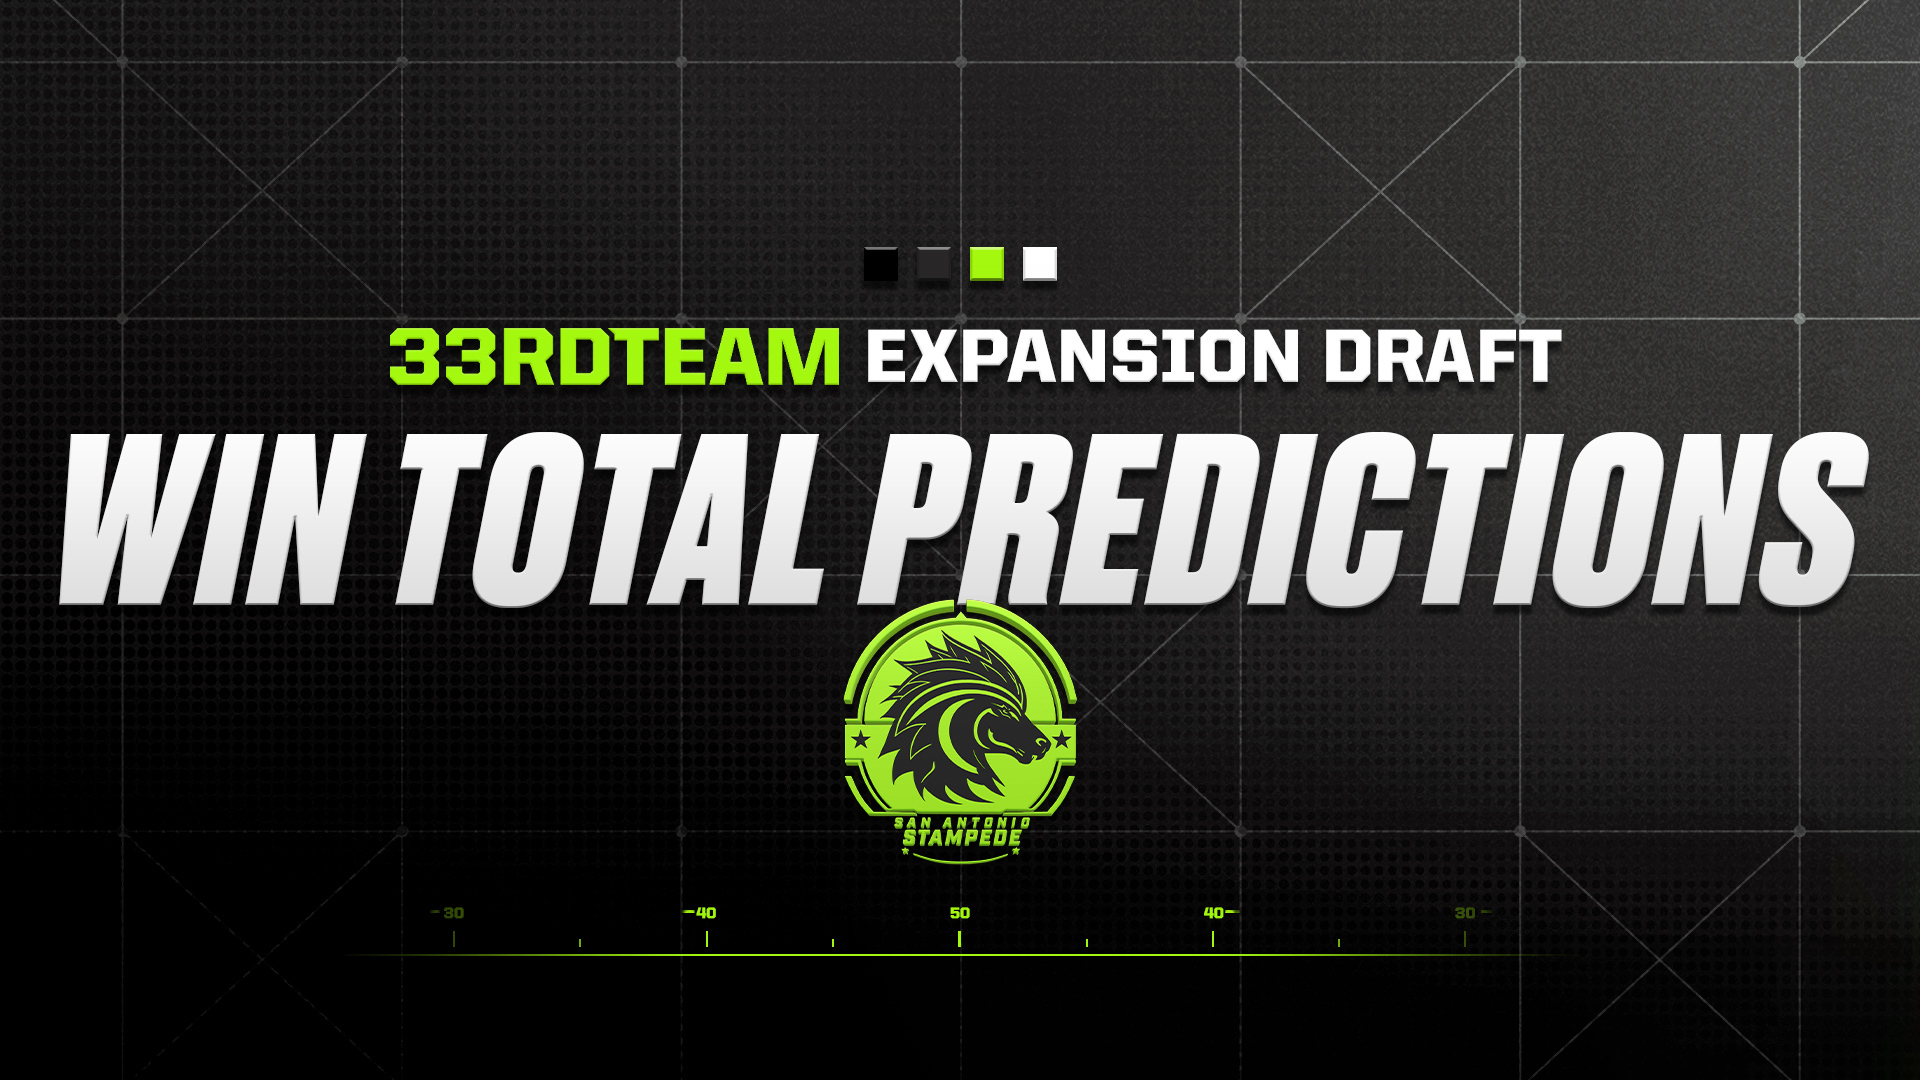 The 33rd Team Expansion Draft: Win Total Predictions for Stampede